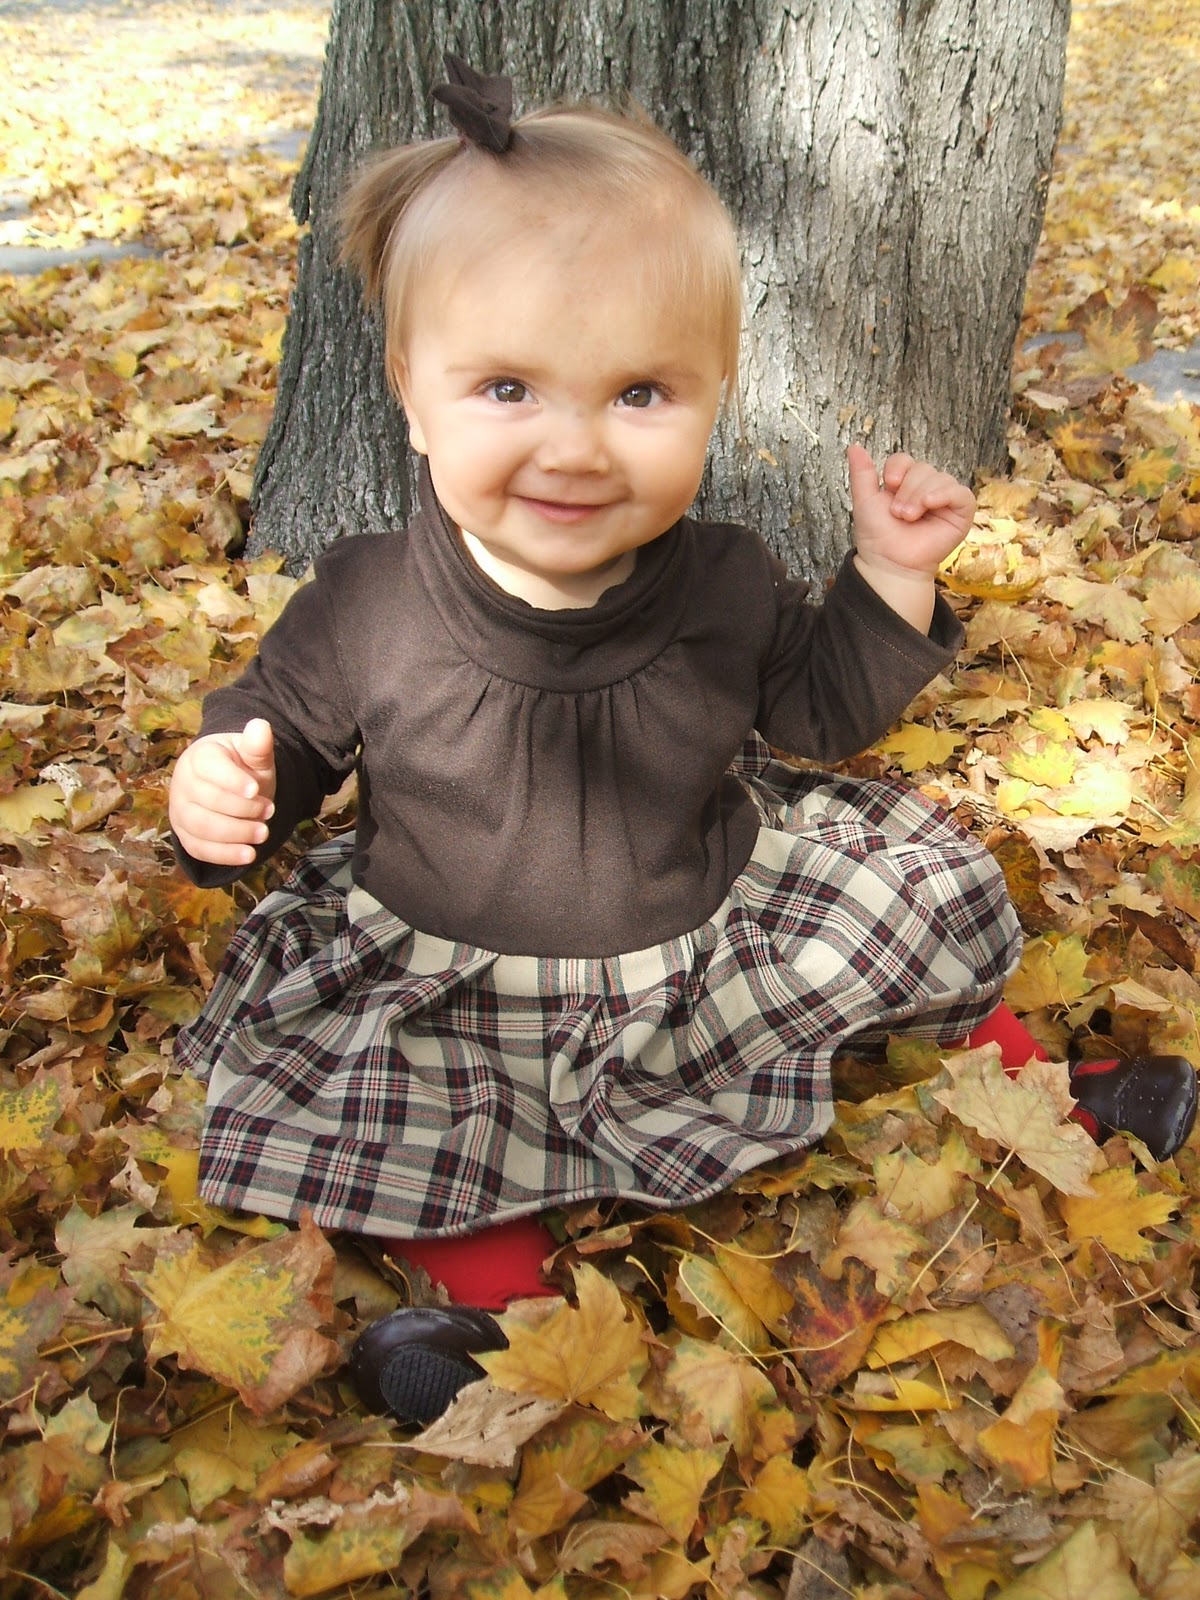 Turtleneck Dress Tutorial - Peek-a-Boo Pages - Patterns, Fabric & More!